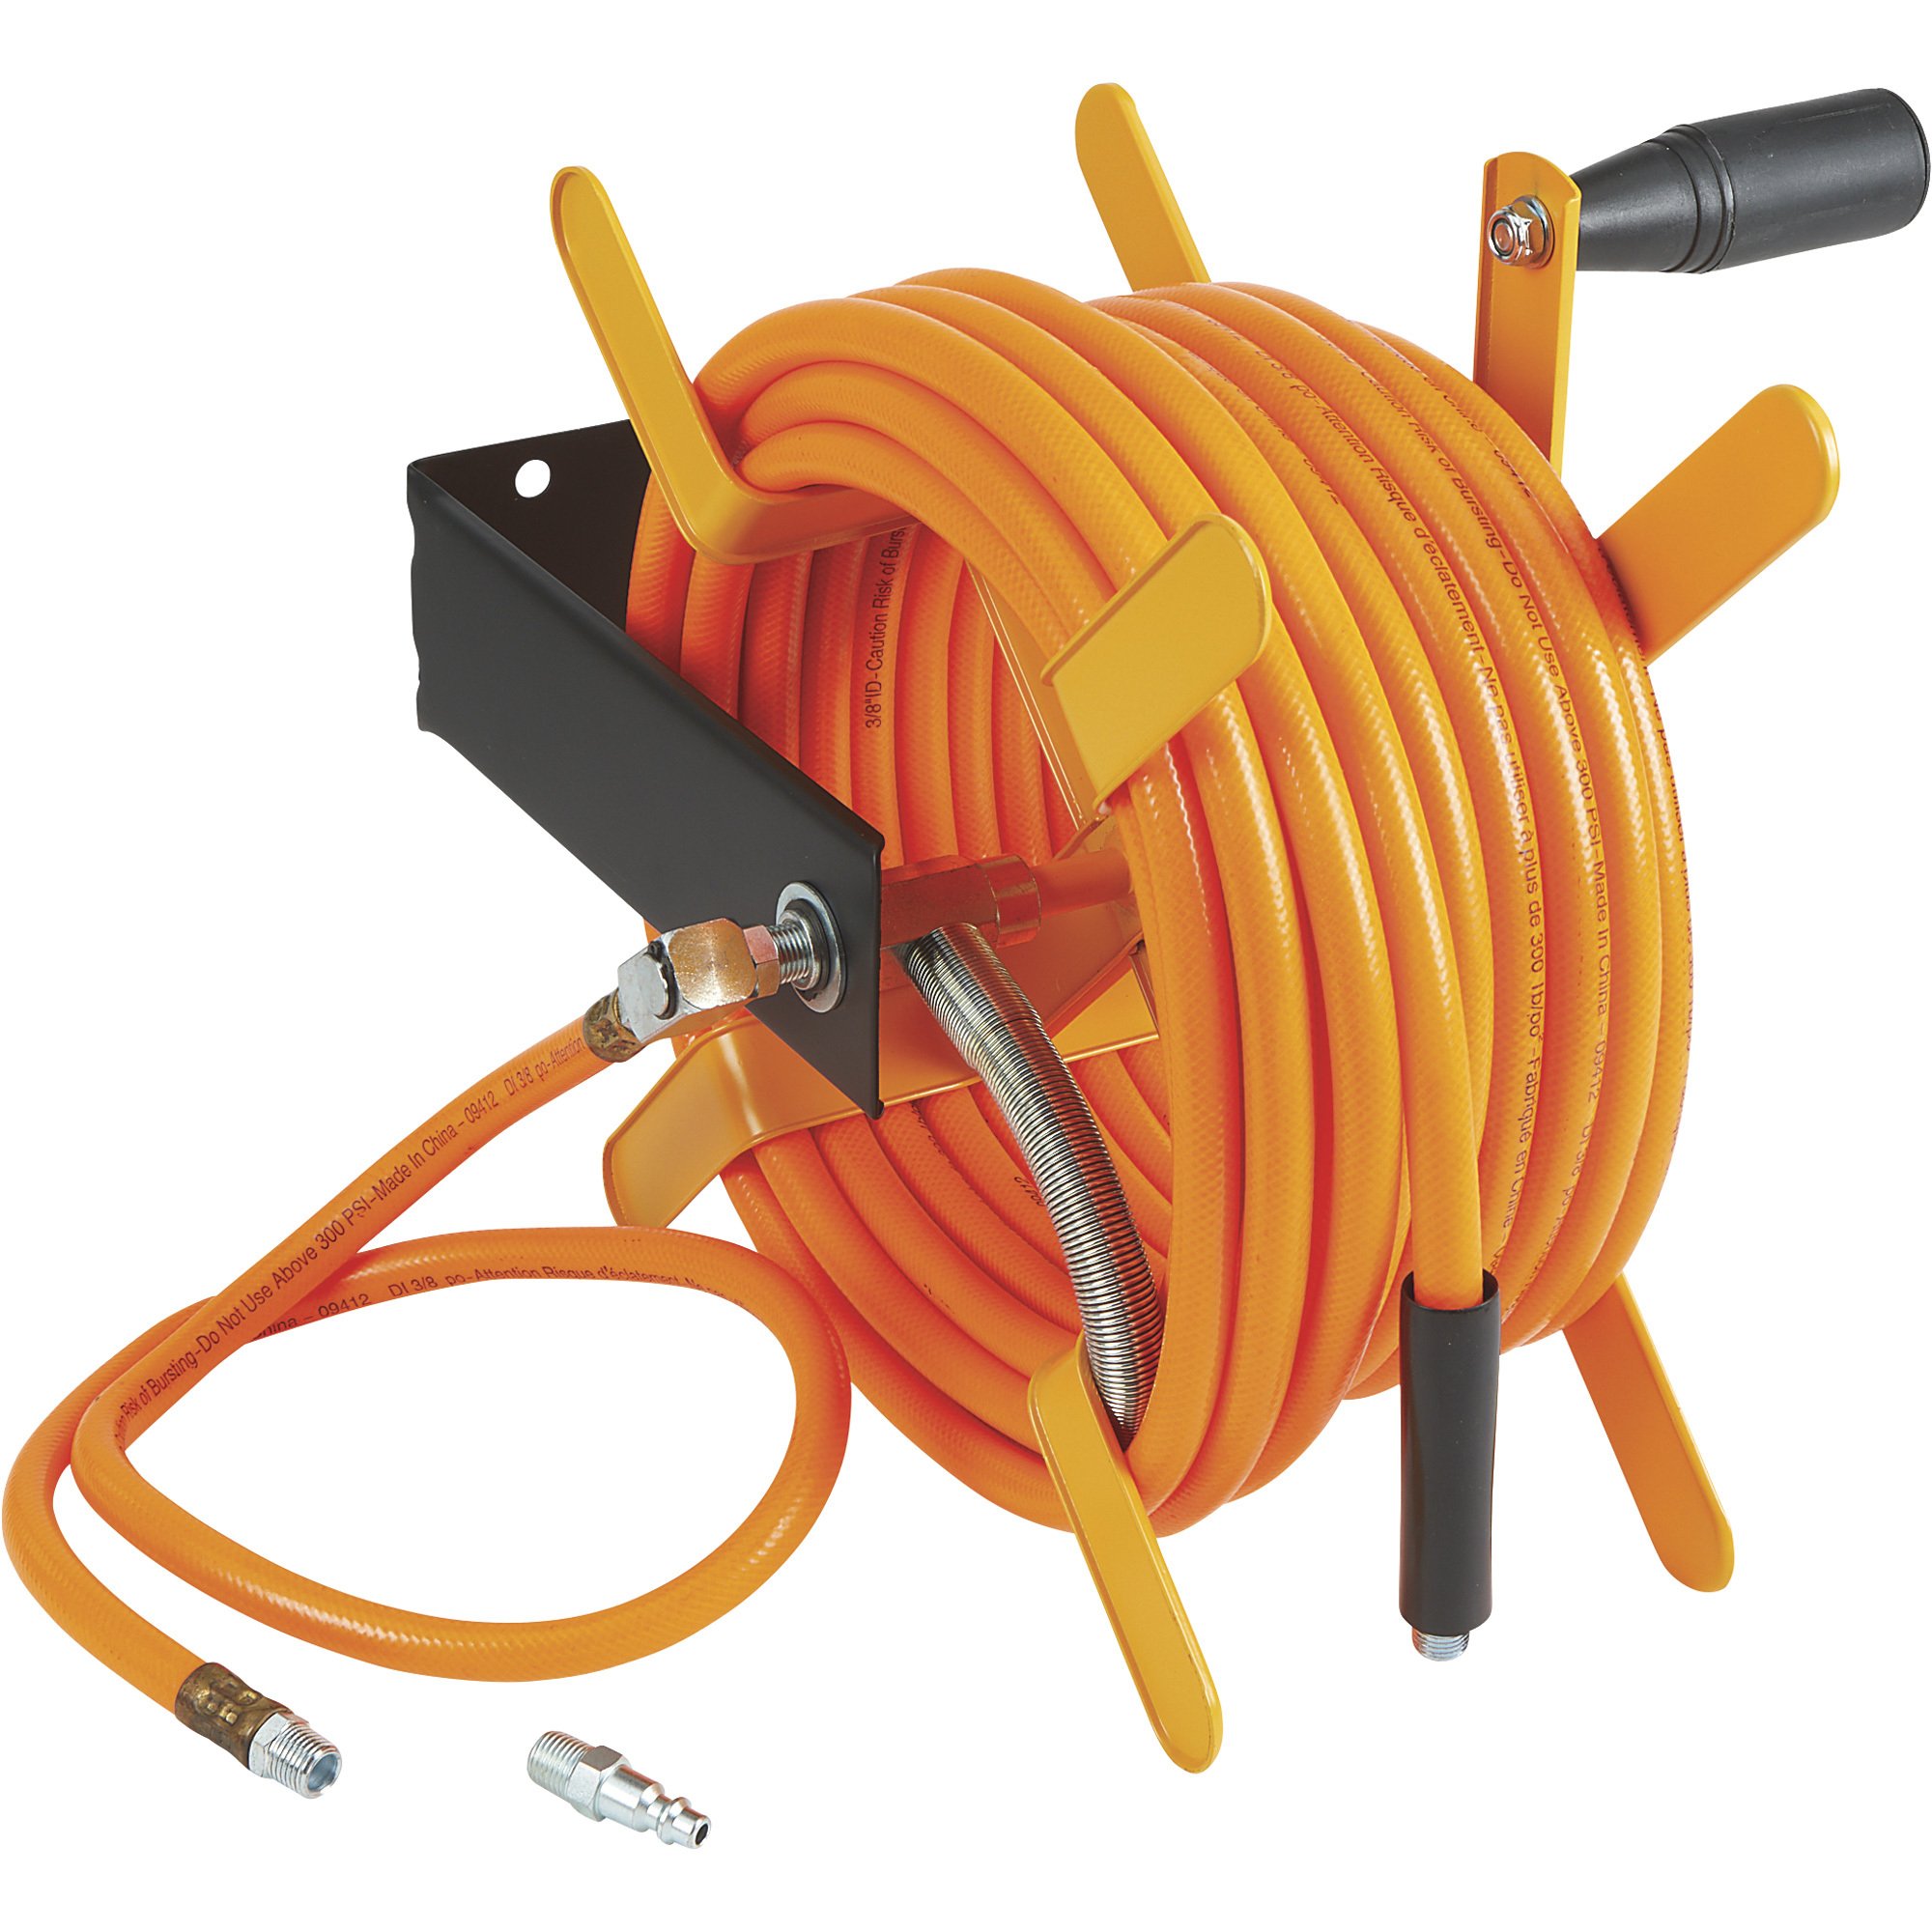 Amflo Wall-Mount Air Hose Reel — With 50ft. x 3/8in. Hose